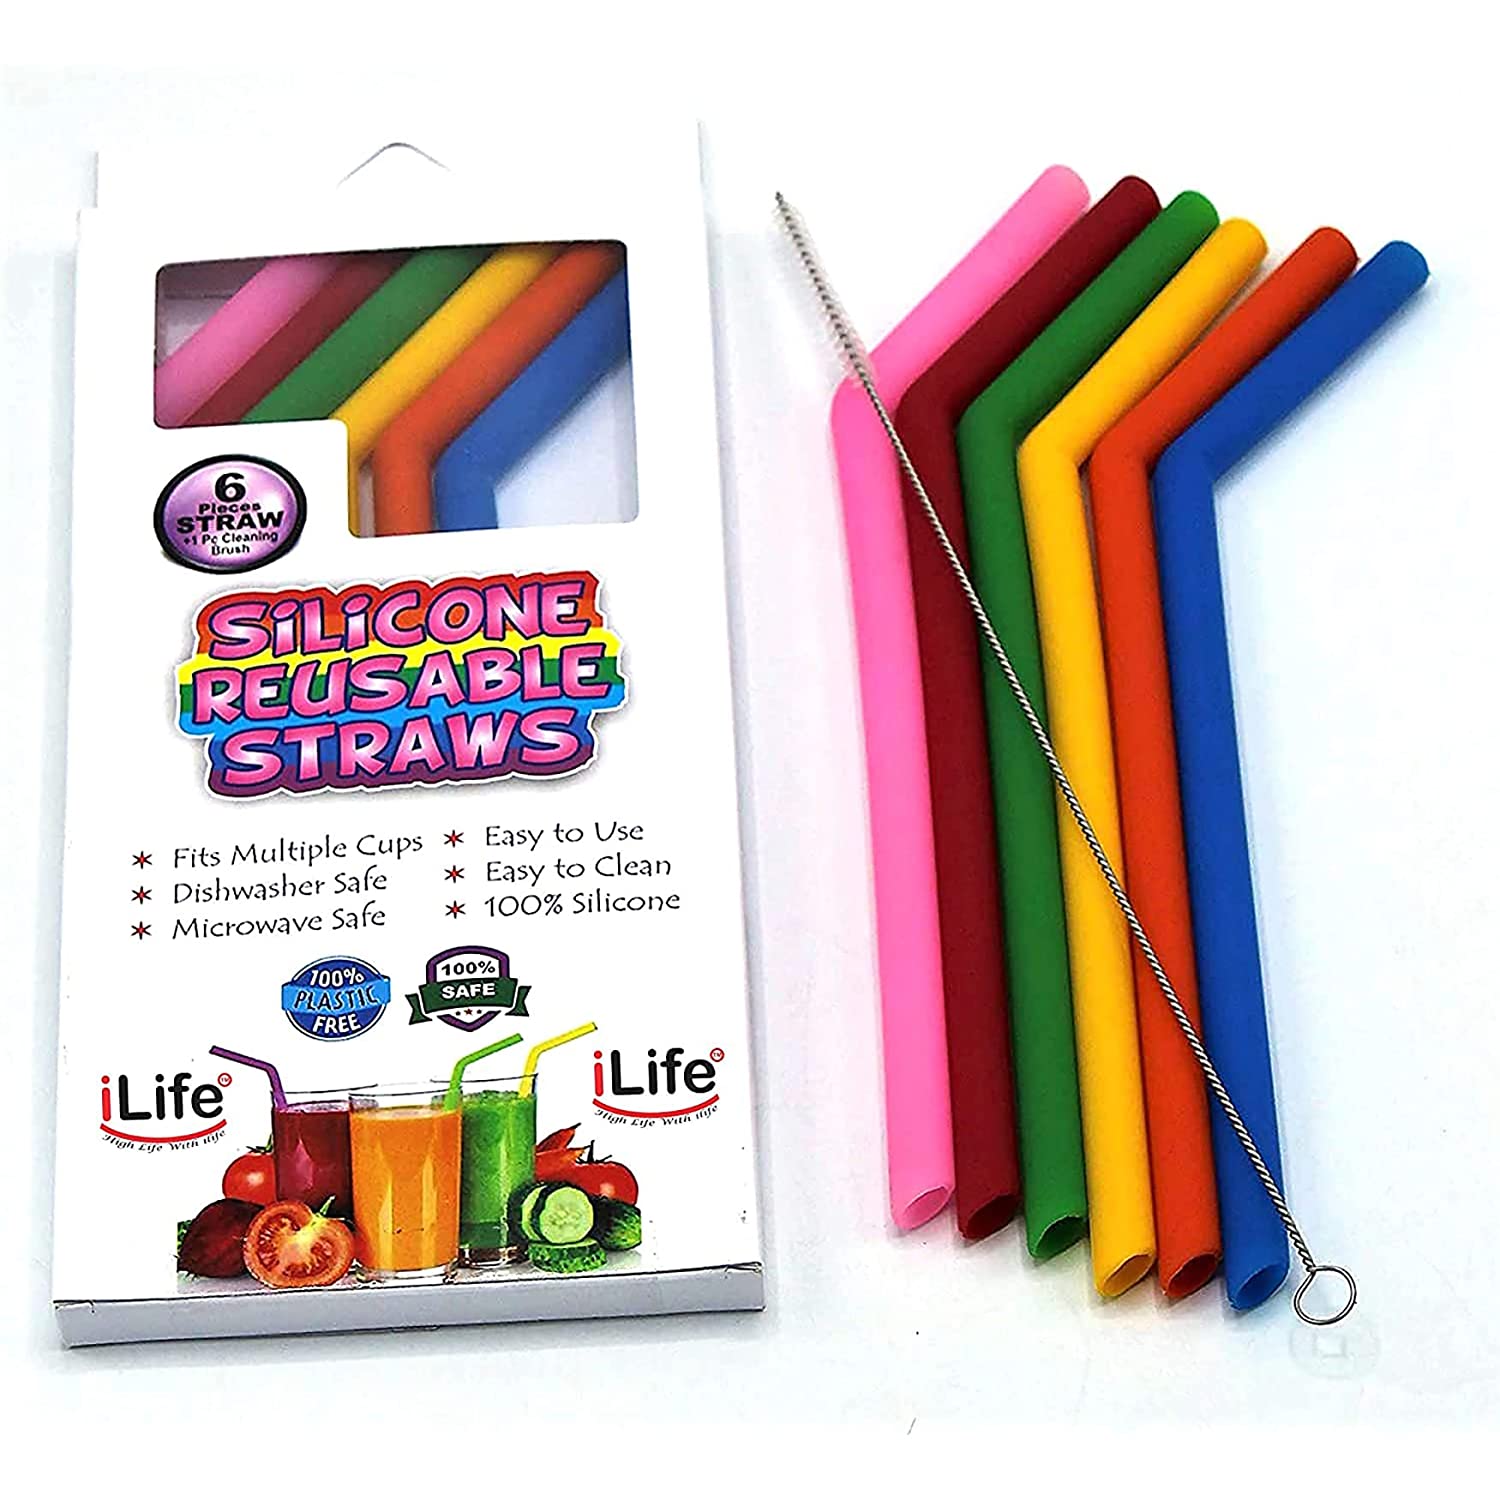 Reusable Drinking Straws : 18 inches long, large diameter adapted straws